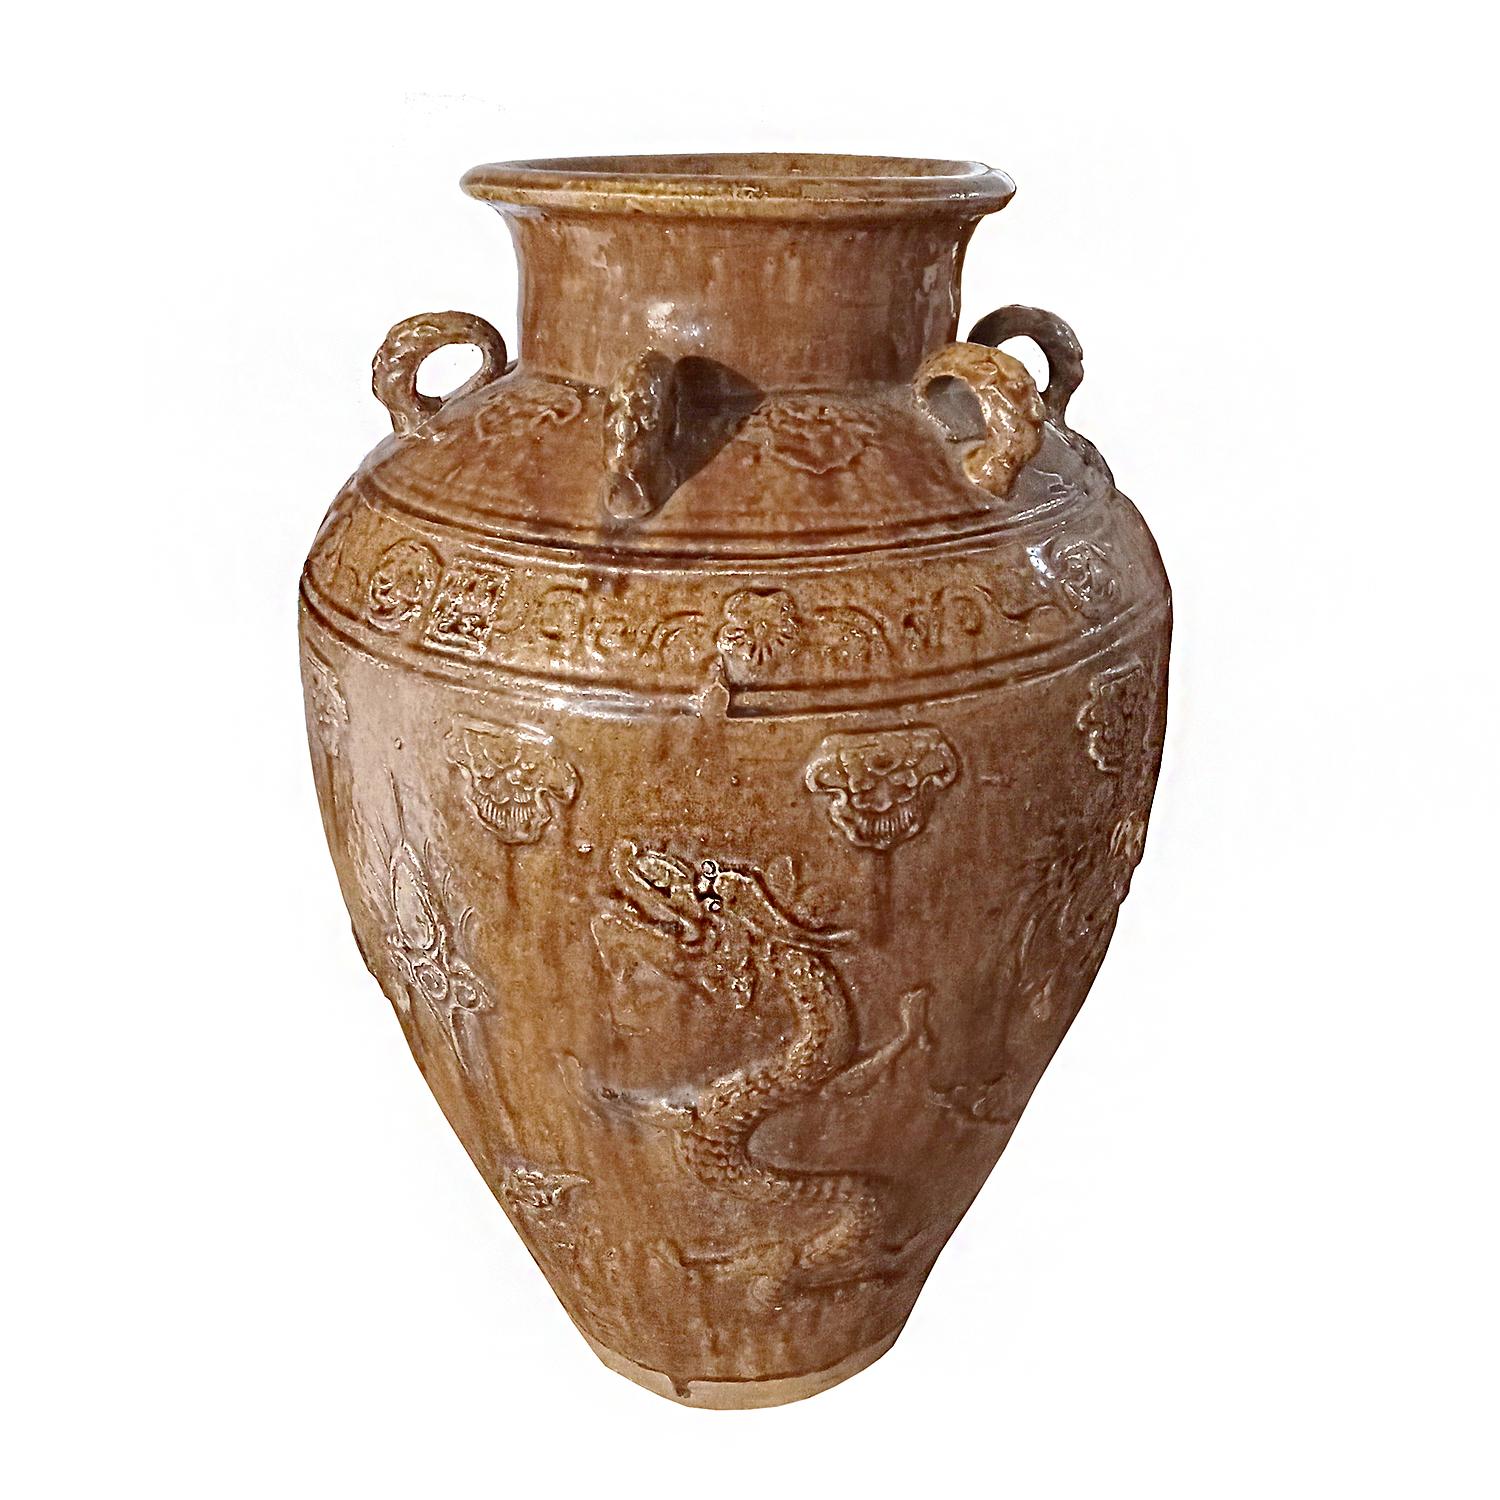 A large ceramic jar / vase / urn from Bali, Indonesia, late 20th Century, hand-crafted. Three Decorative handles, glossy brown glaze, and bas-relief throughout with classic Asian dragon design. 

Can be used indoors or outdoors. 
